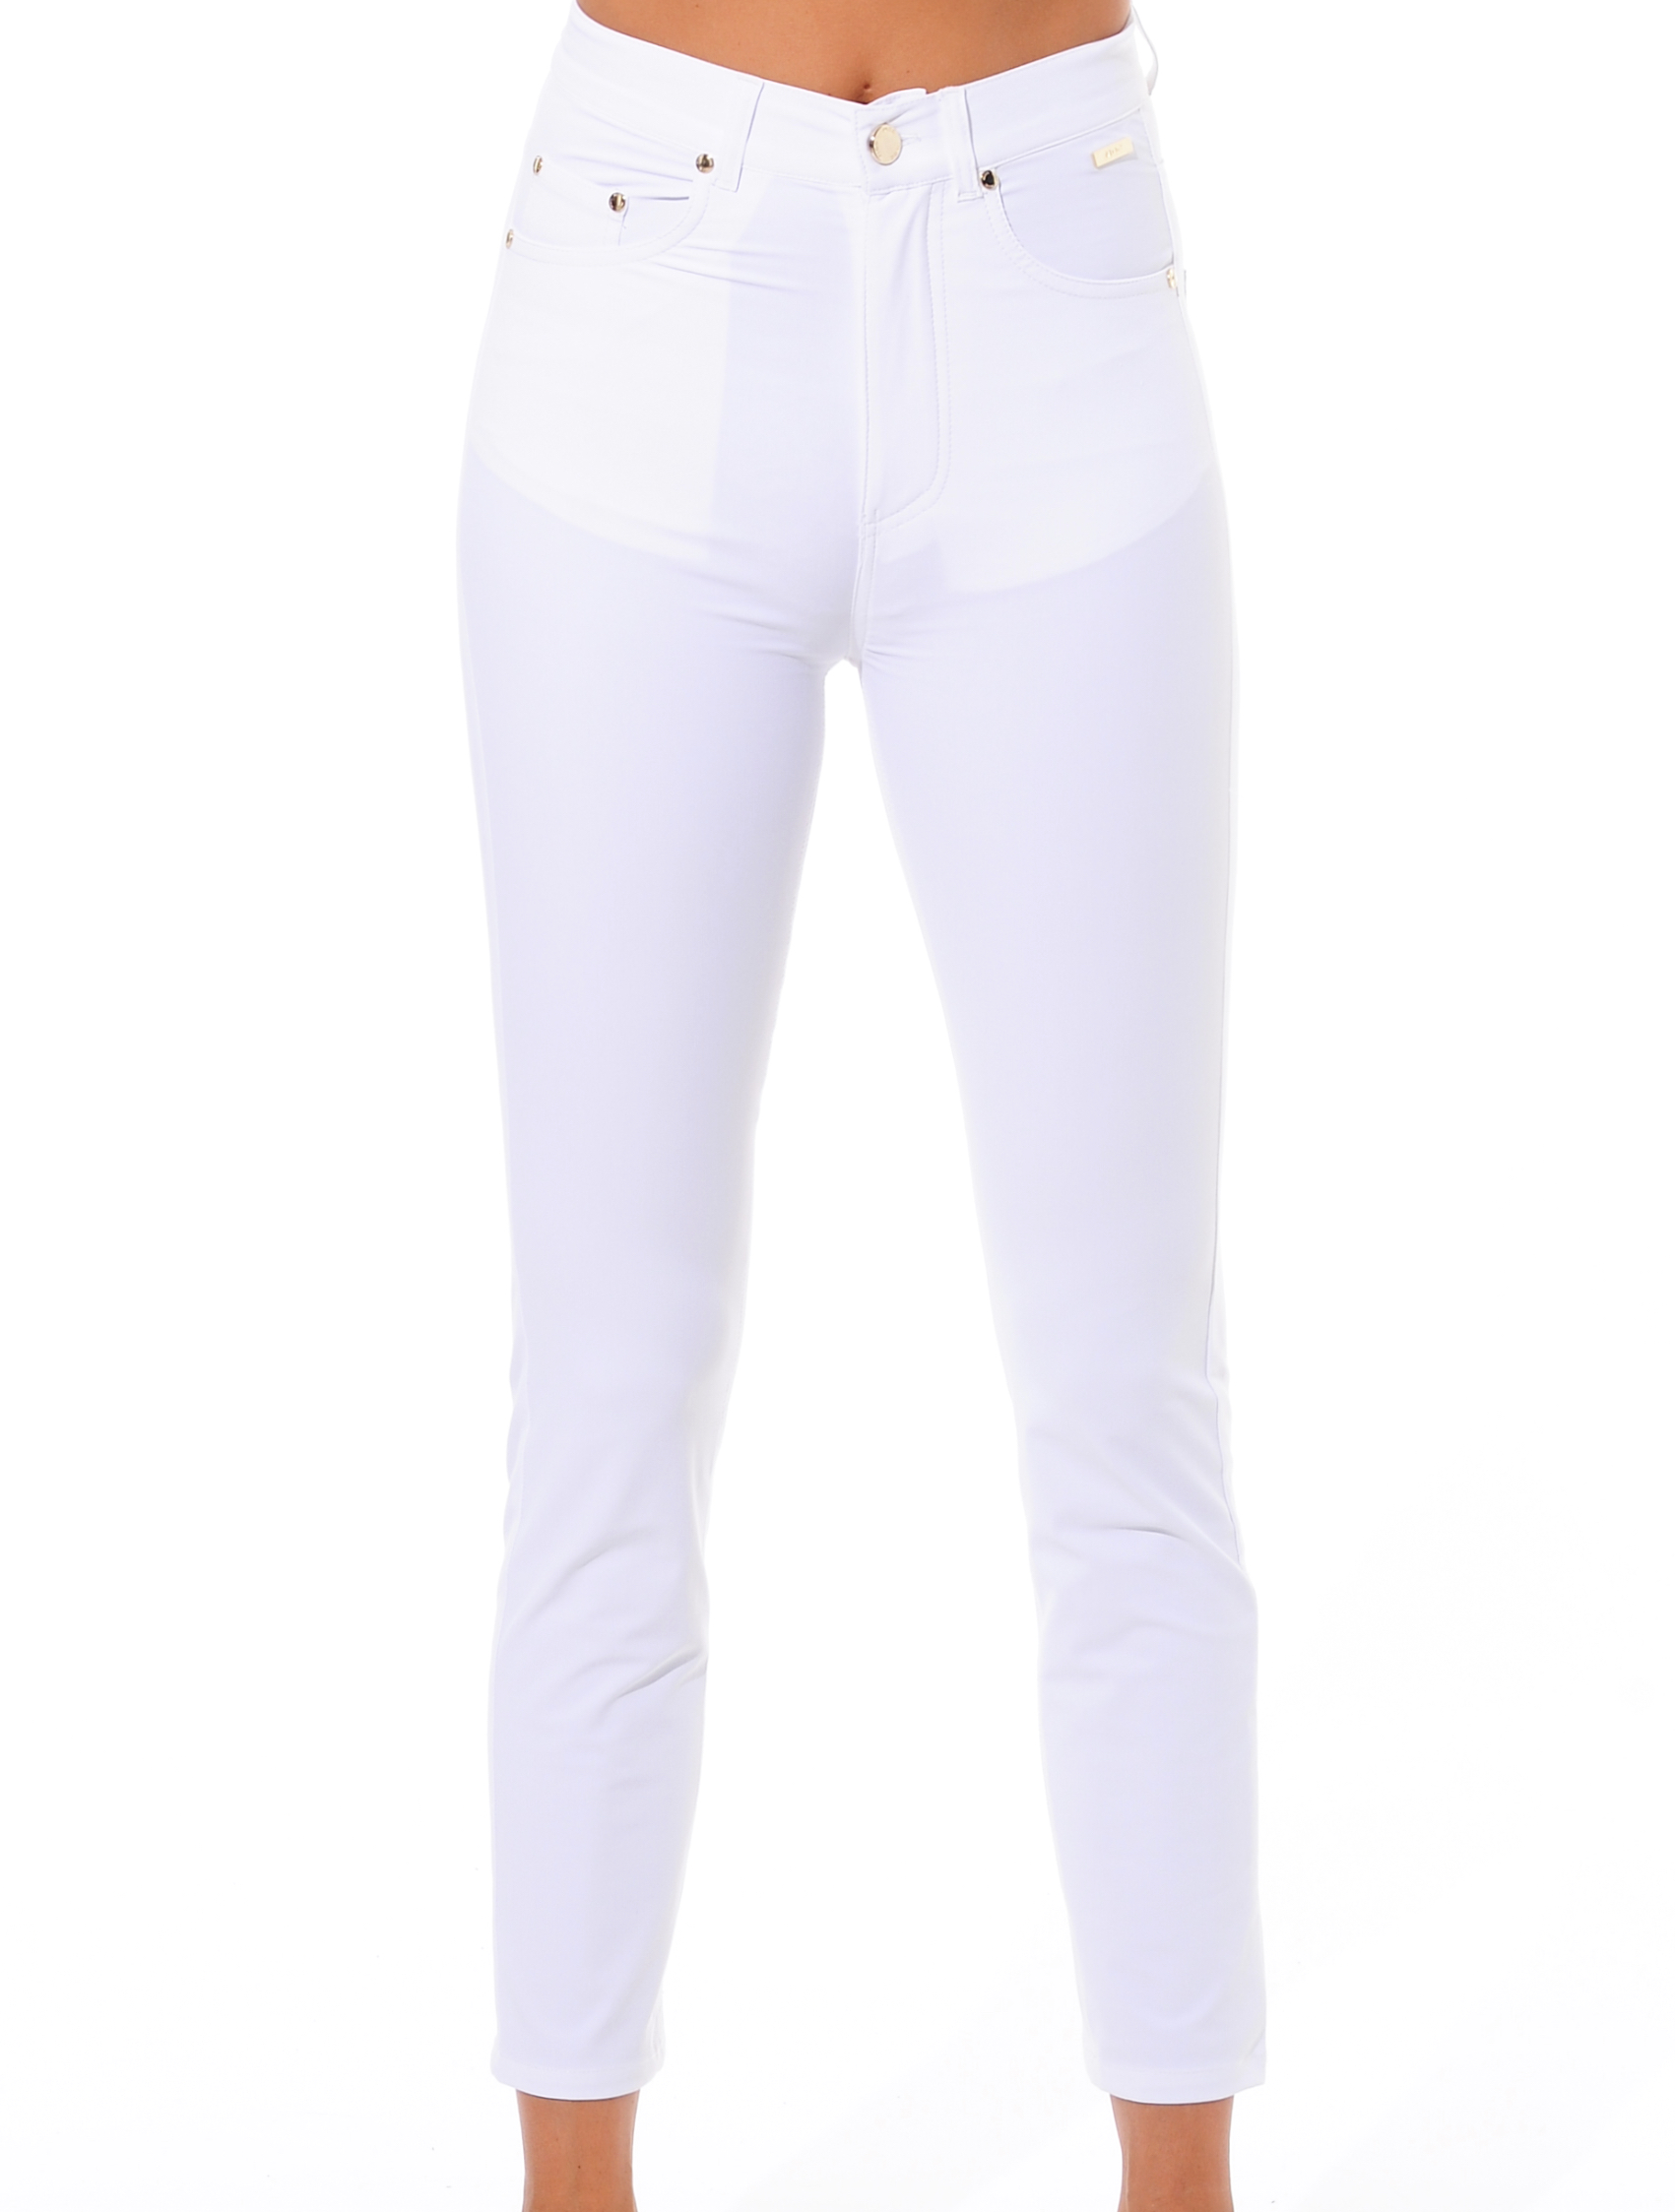 4way stretch high waist ankle pants white 